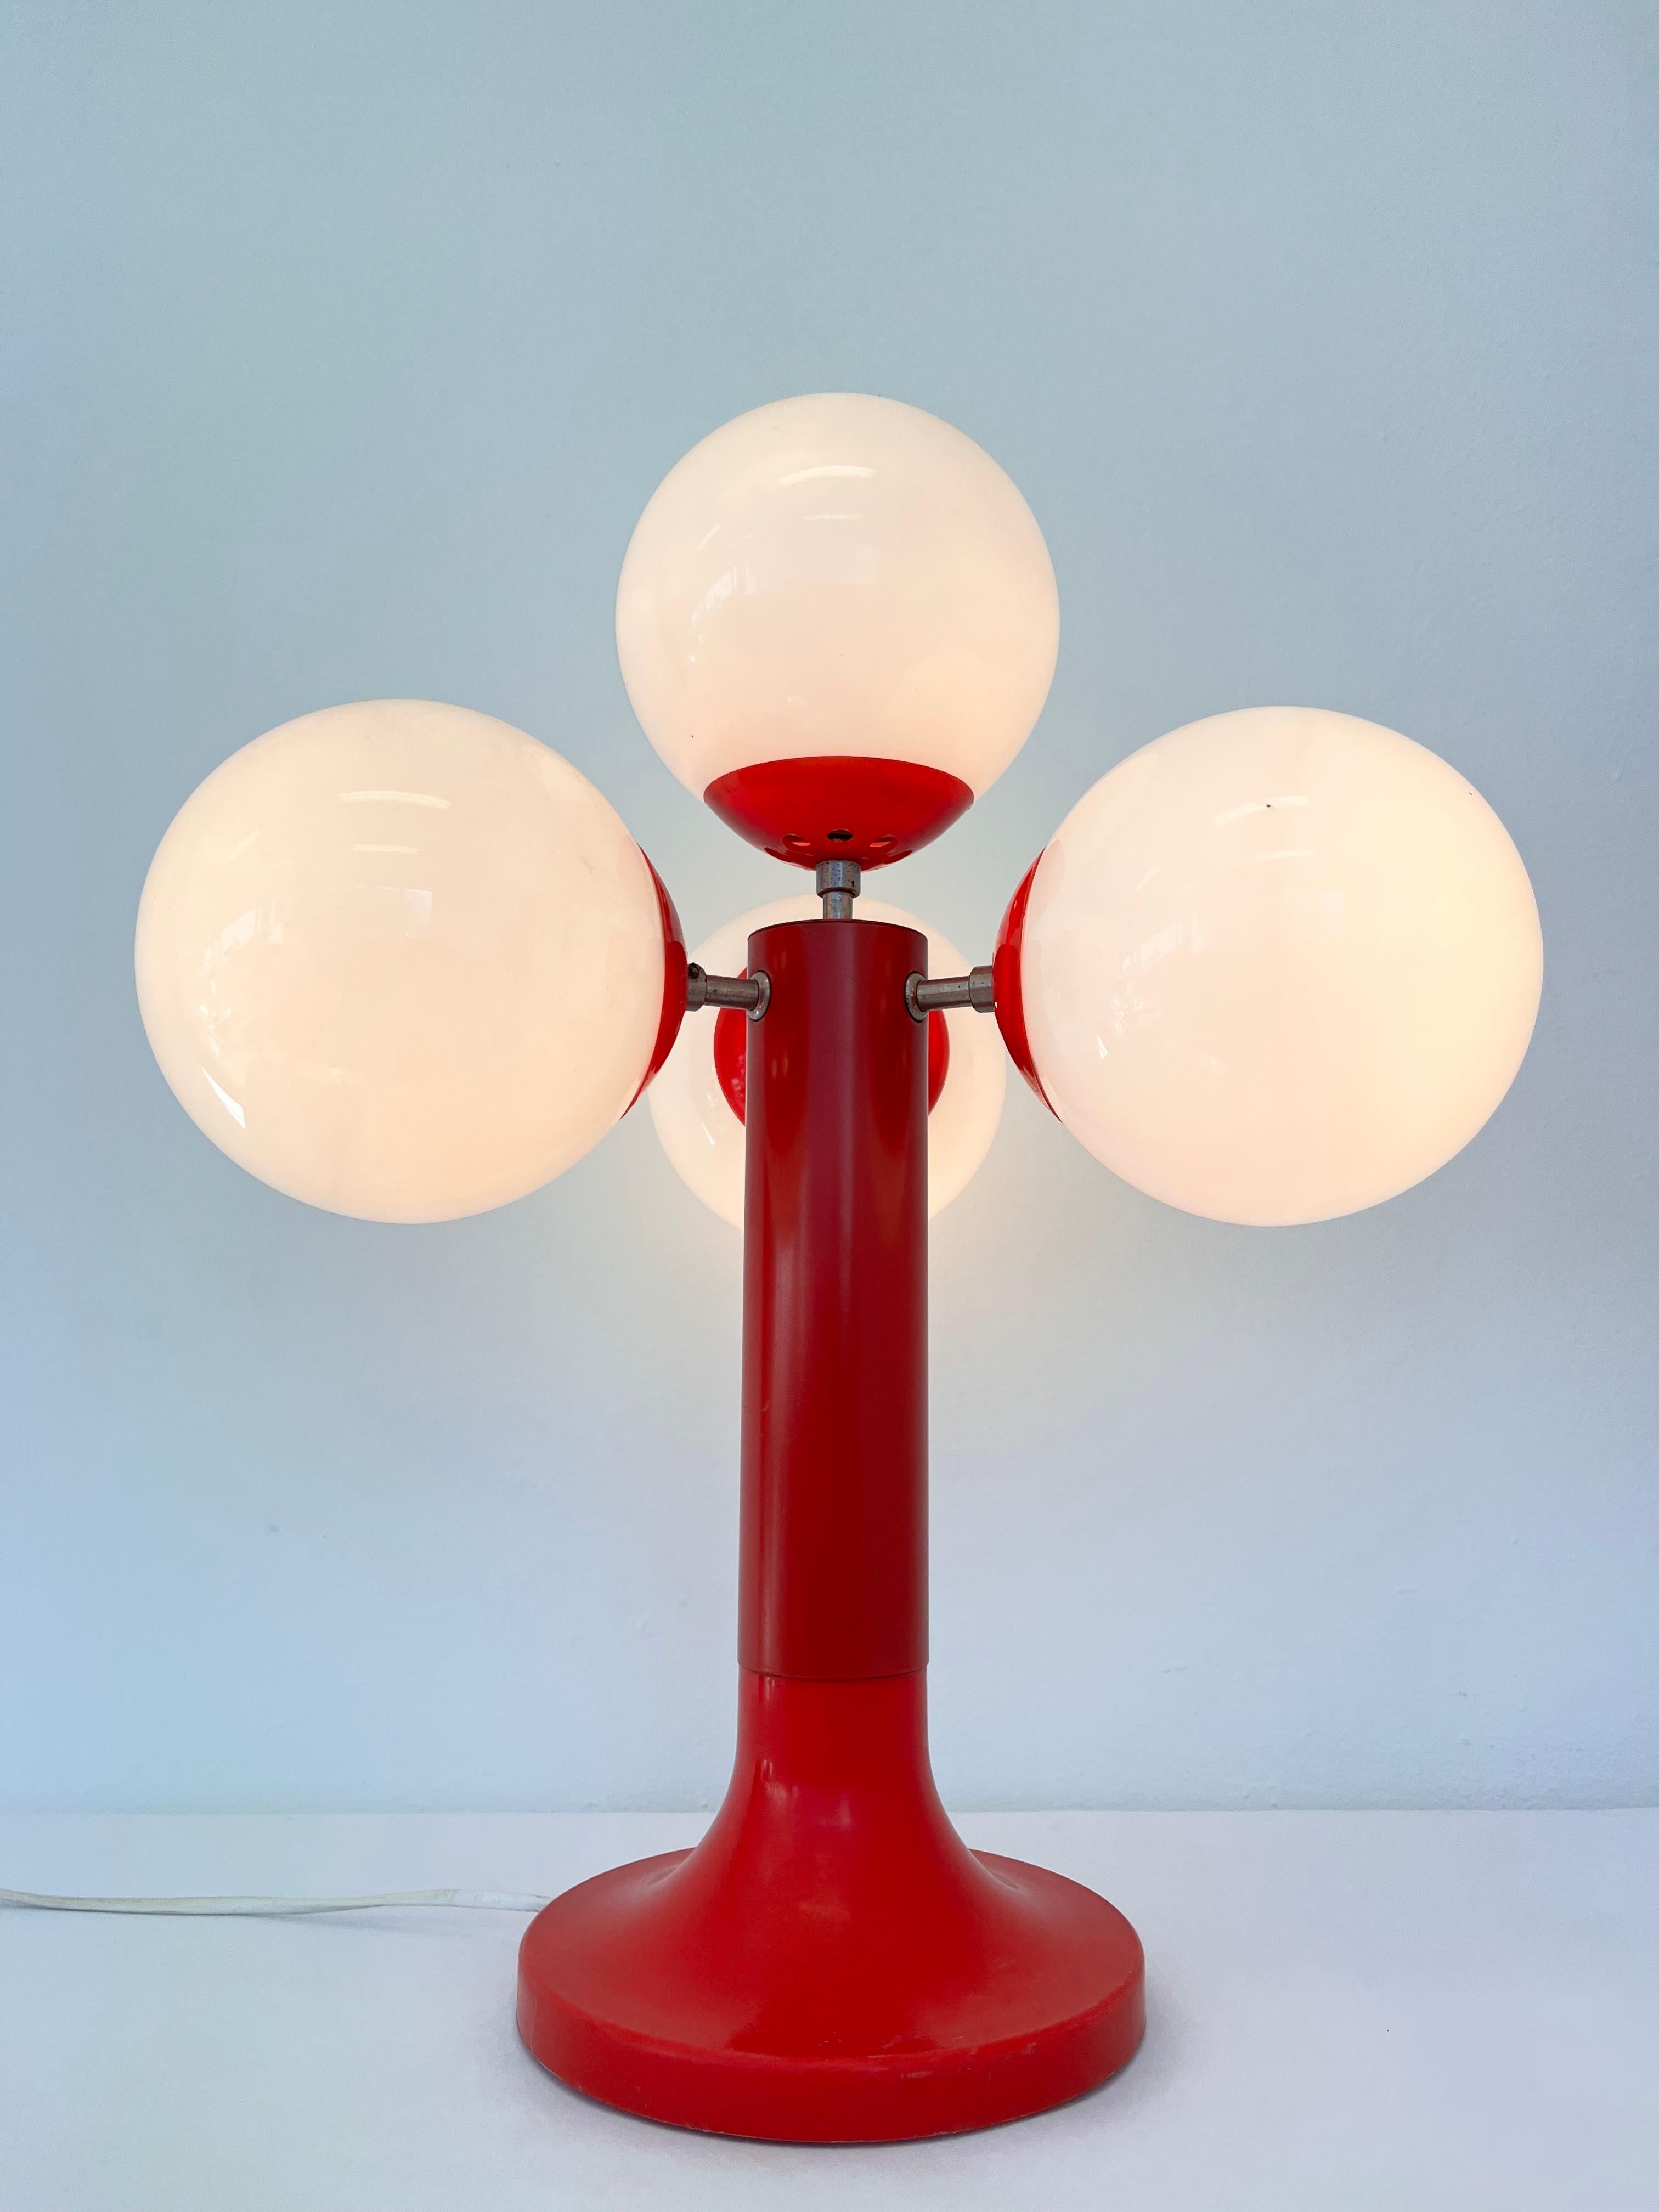 Late 20th Century XL Midcentury Space Age Table Lamp, Sputnik or Atom, 1970s - Germany For Sale